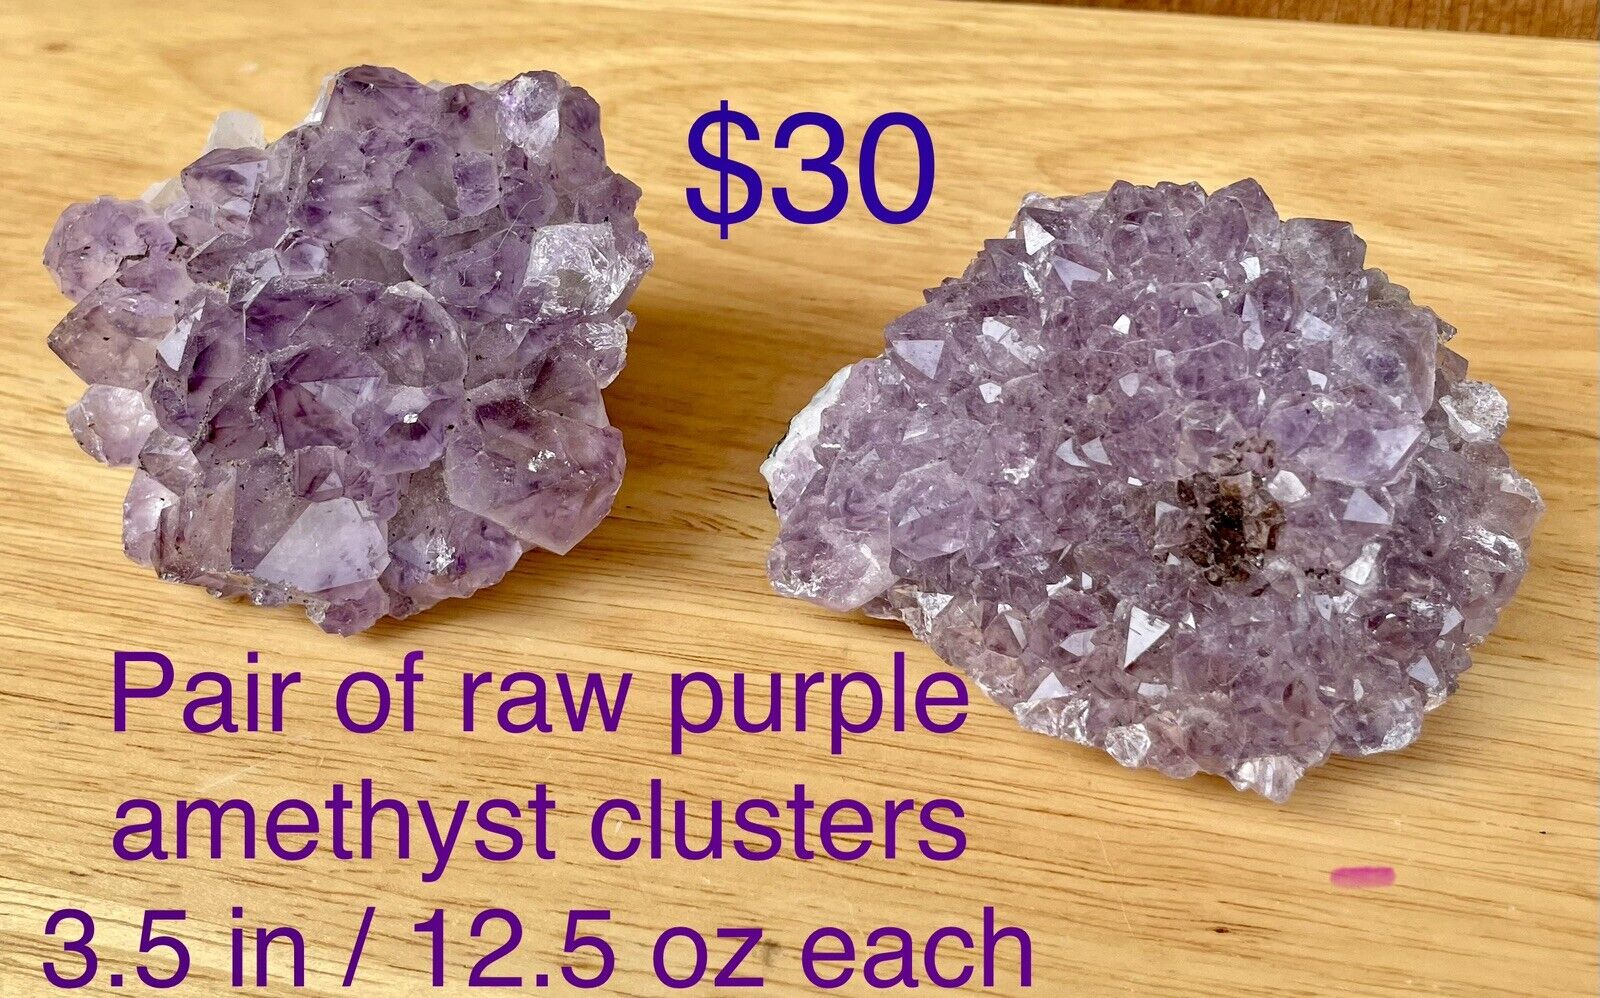 Lowest Price for TWO Amethyst Clusters